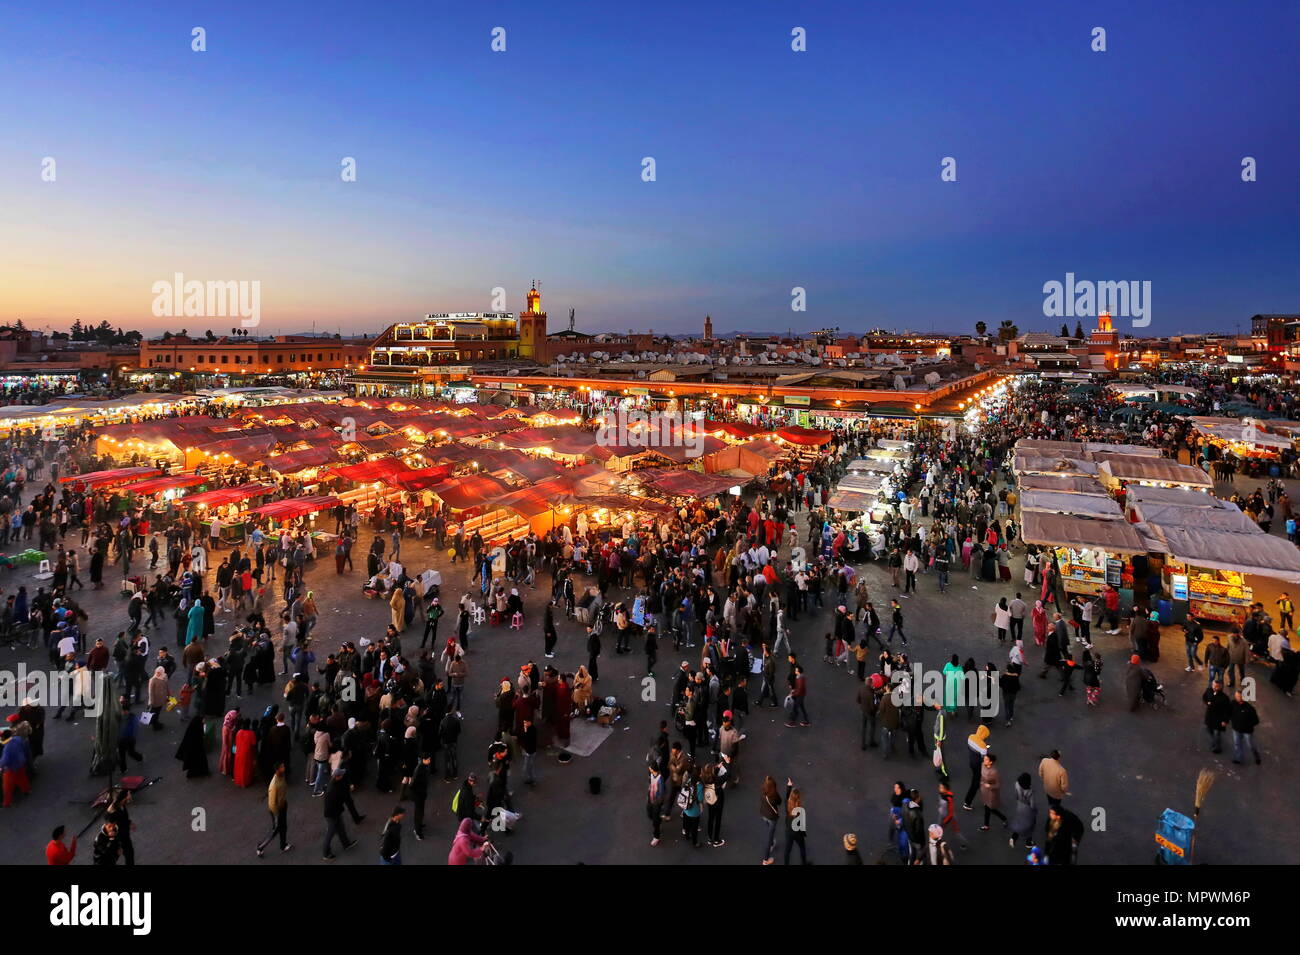 MARRAKECH, MOROCCO - 7 March 2016: Famous Jemaa el Fna square crowded at dusk. Marrakesh, Morocco Stock Photo